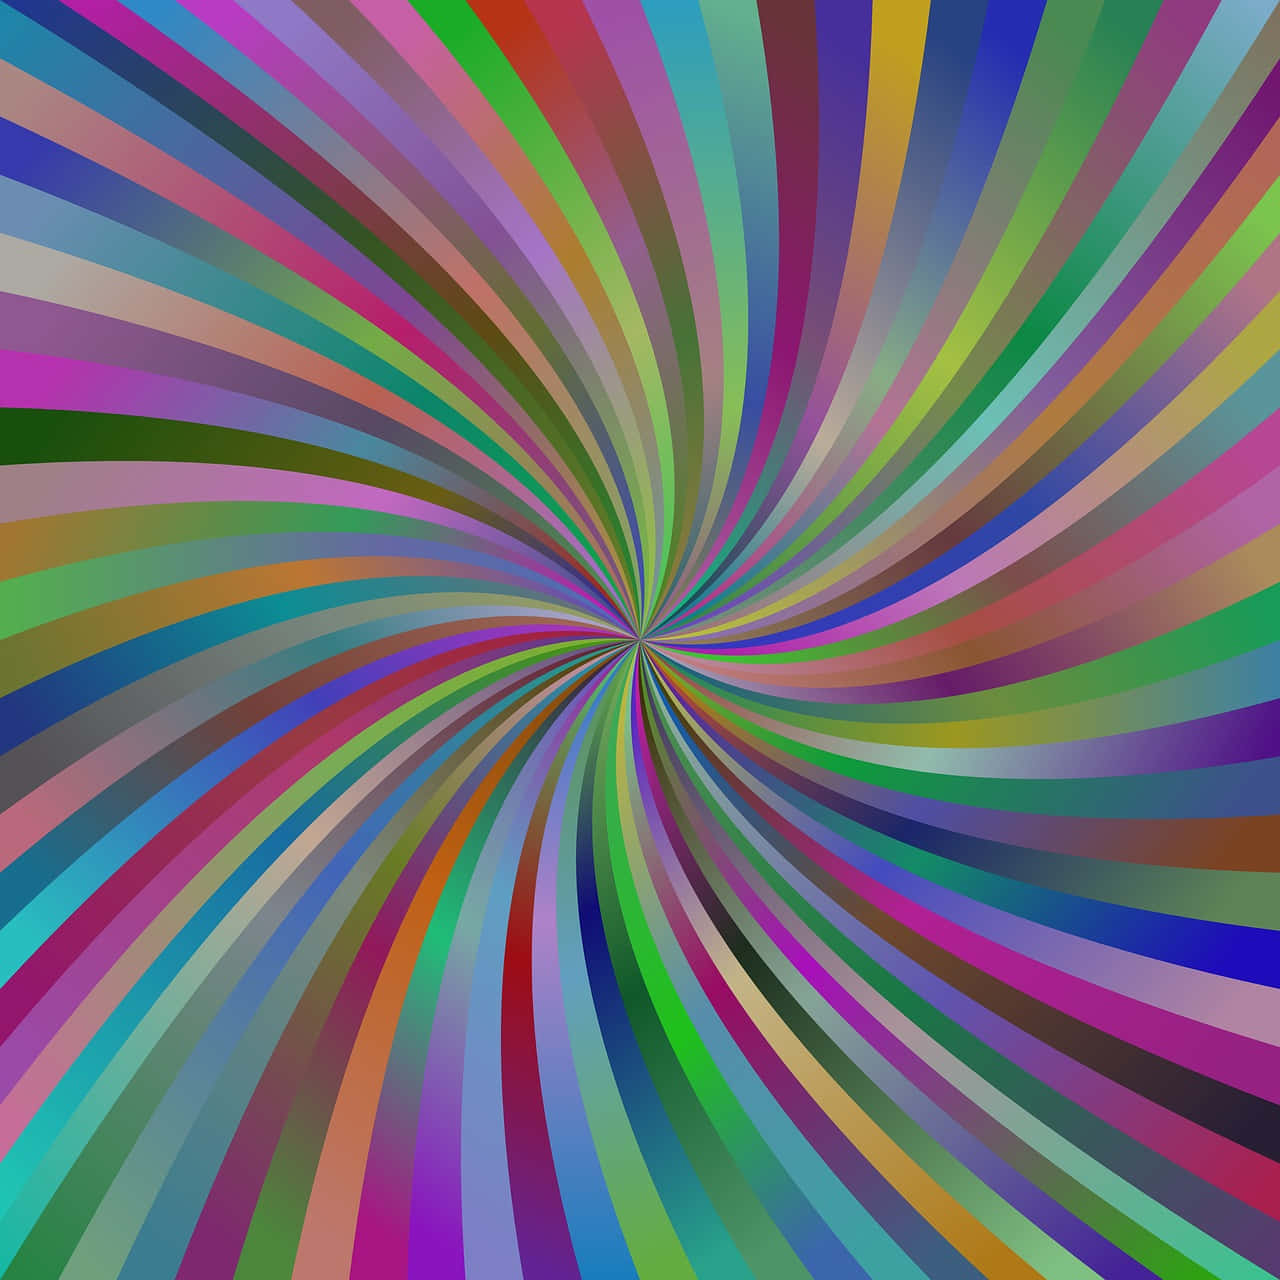 A spiraling gradient of colors against a white background